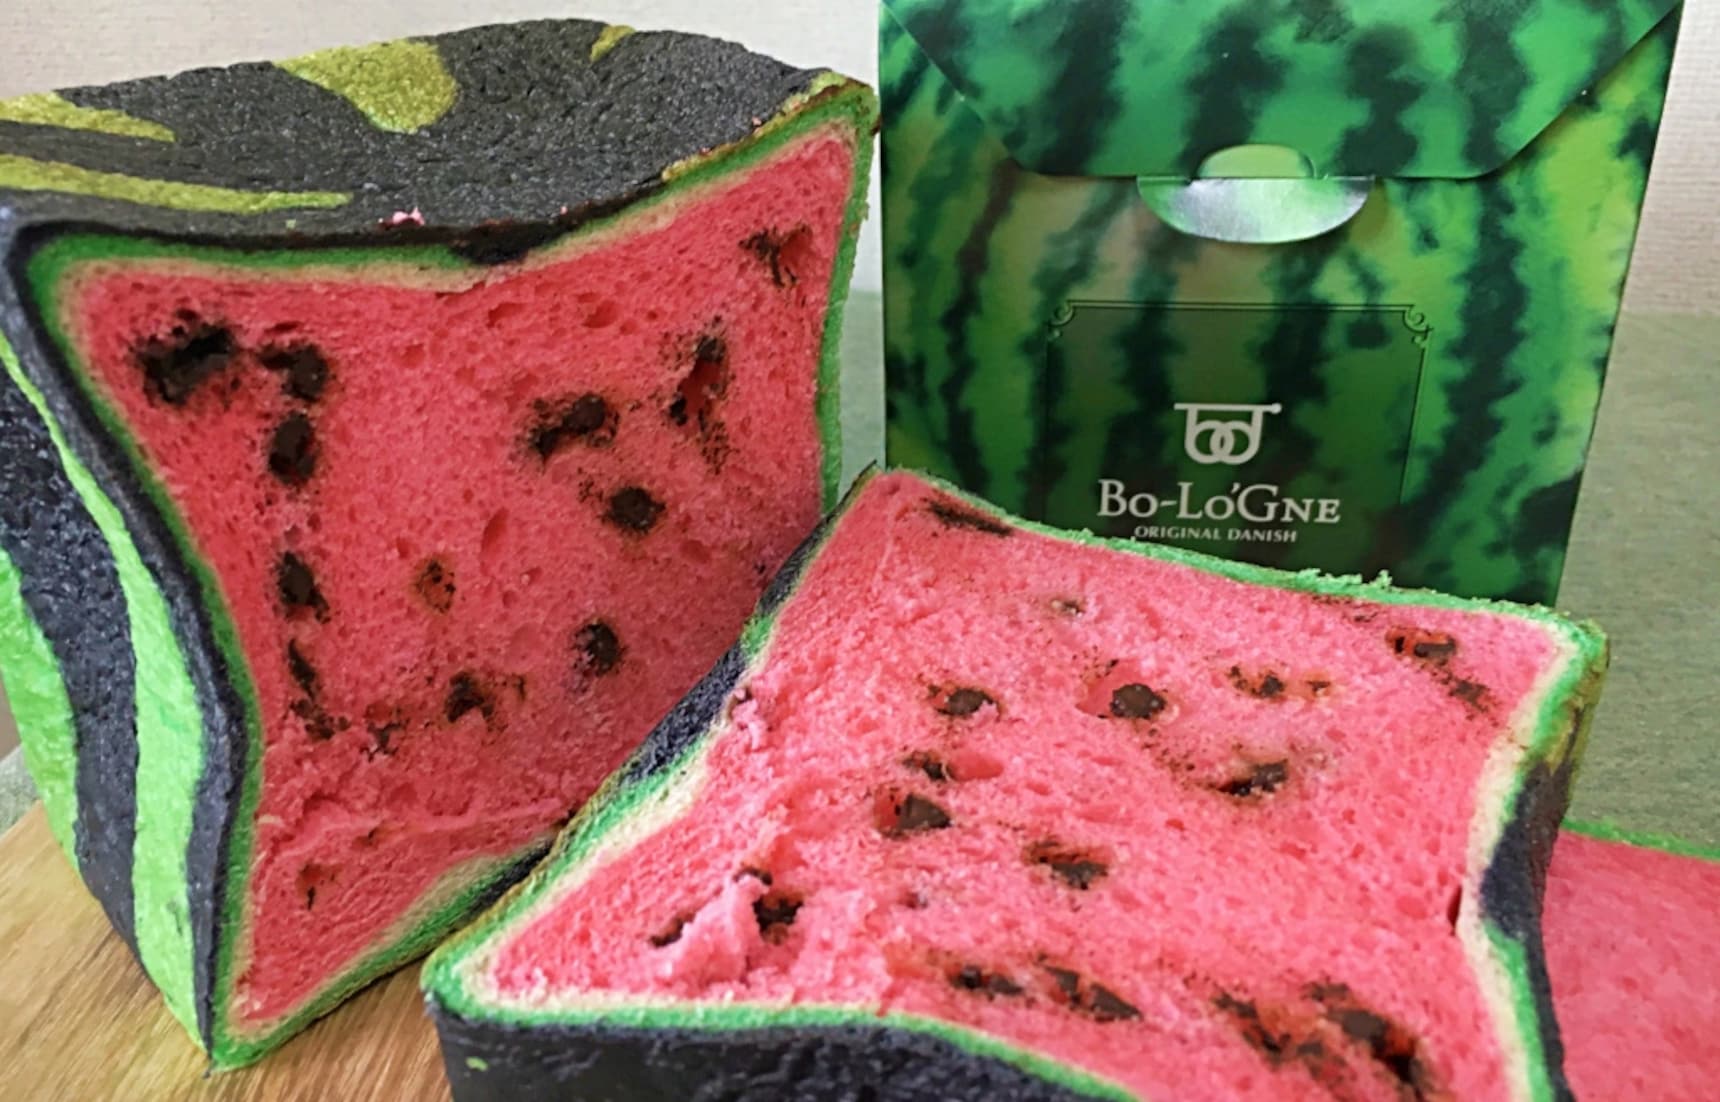 Watermelon Meets Bread in Cubic Form